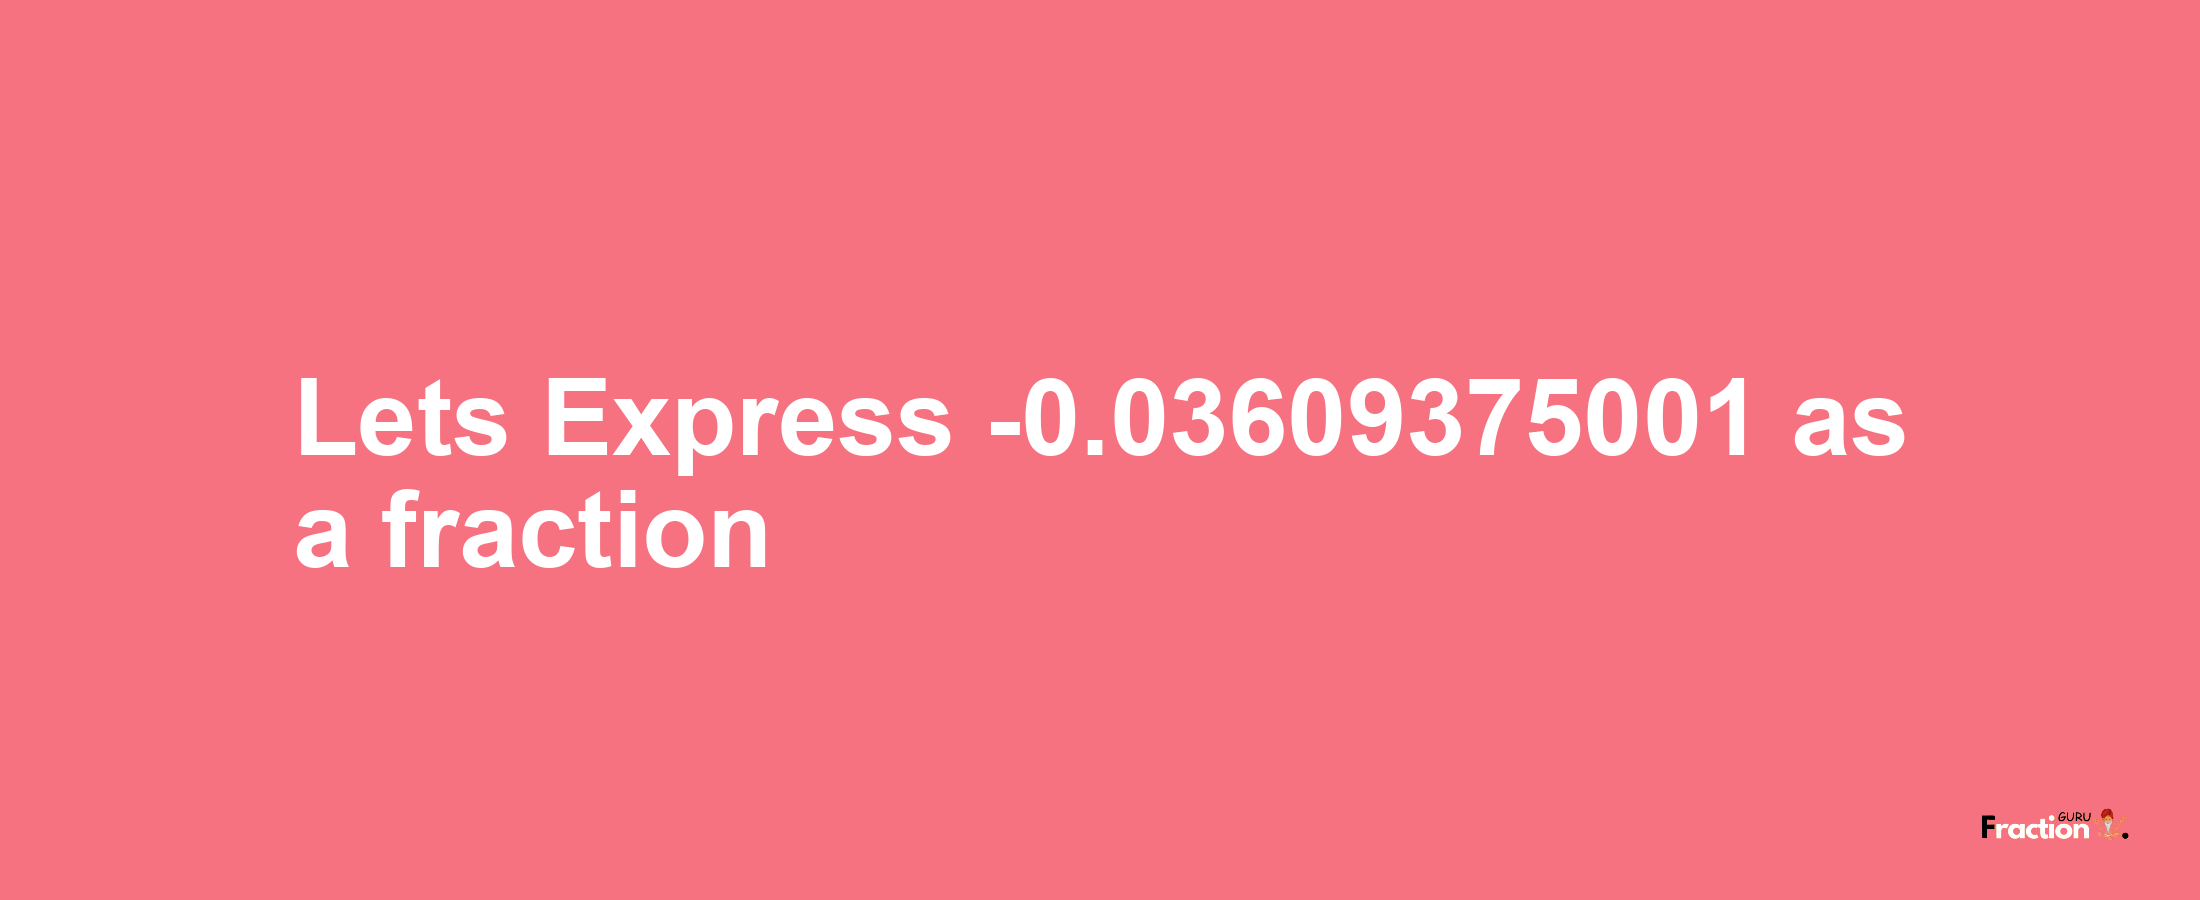 Lets Express -0.03609375001 as afraction